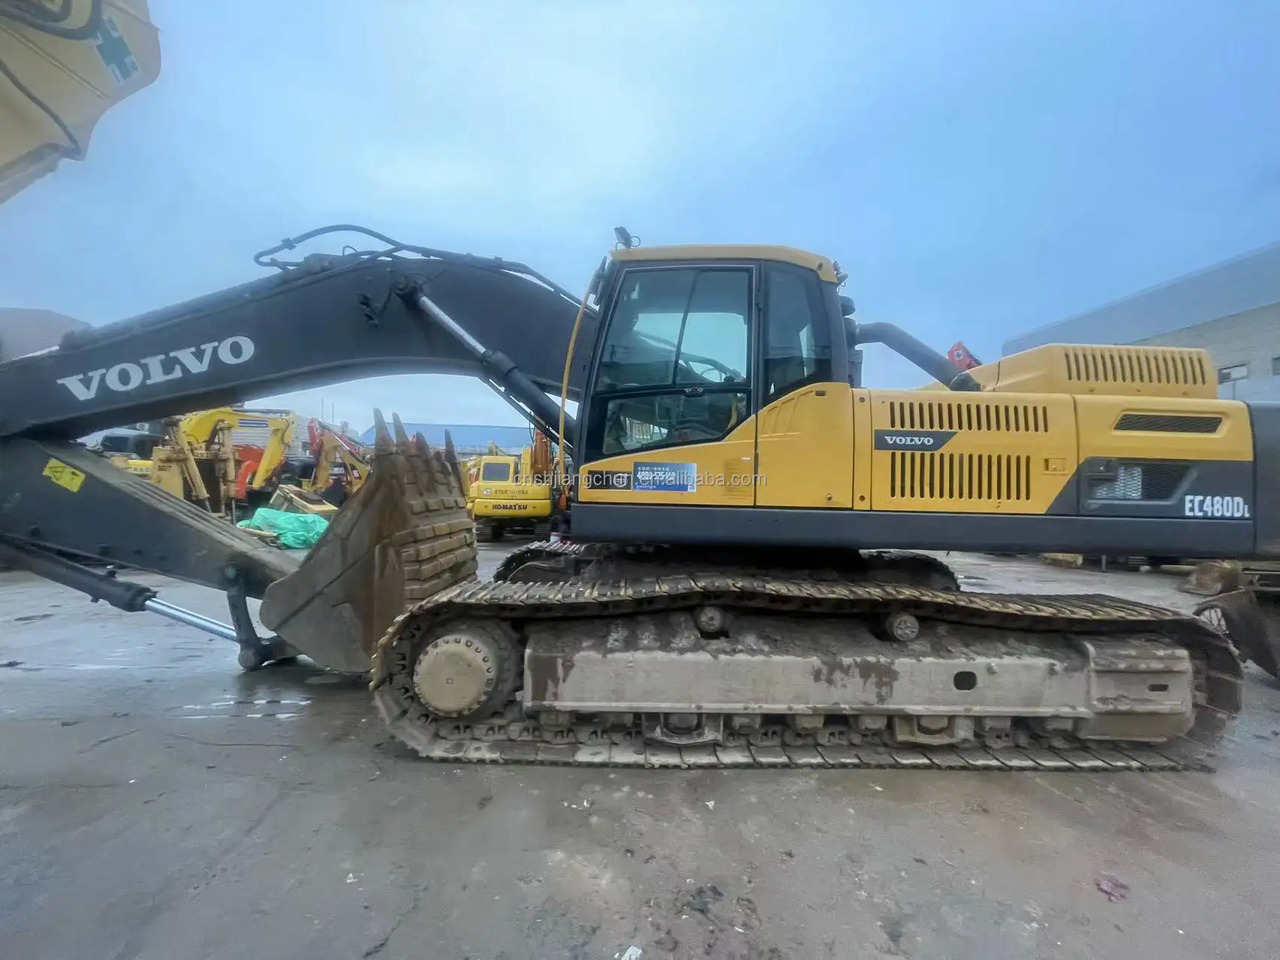 Bandgrävare second hand  hot selling Excavator construction machinery parts used excavator used  Volvo EC480D  in stock for sale: bild 6